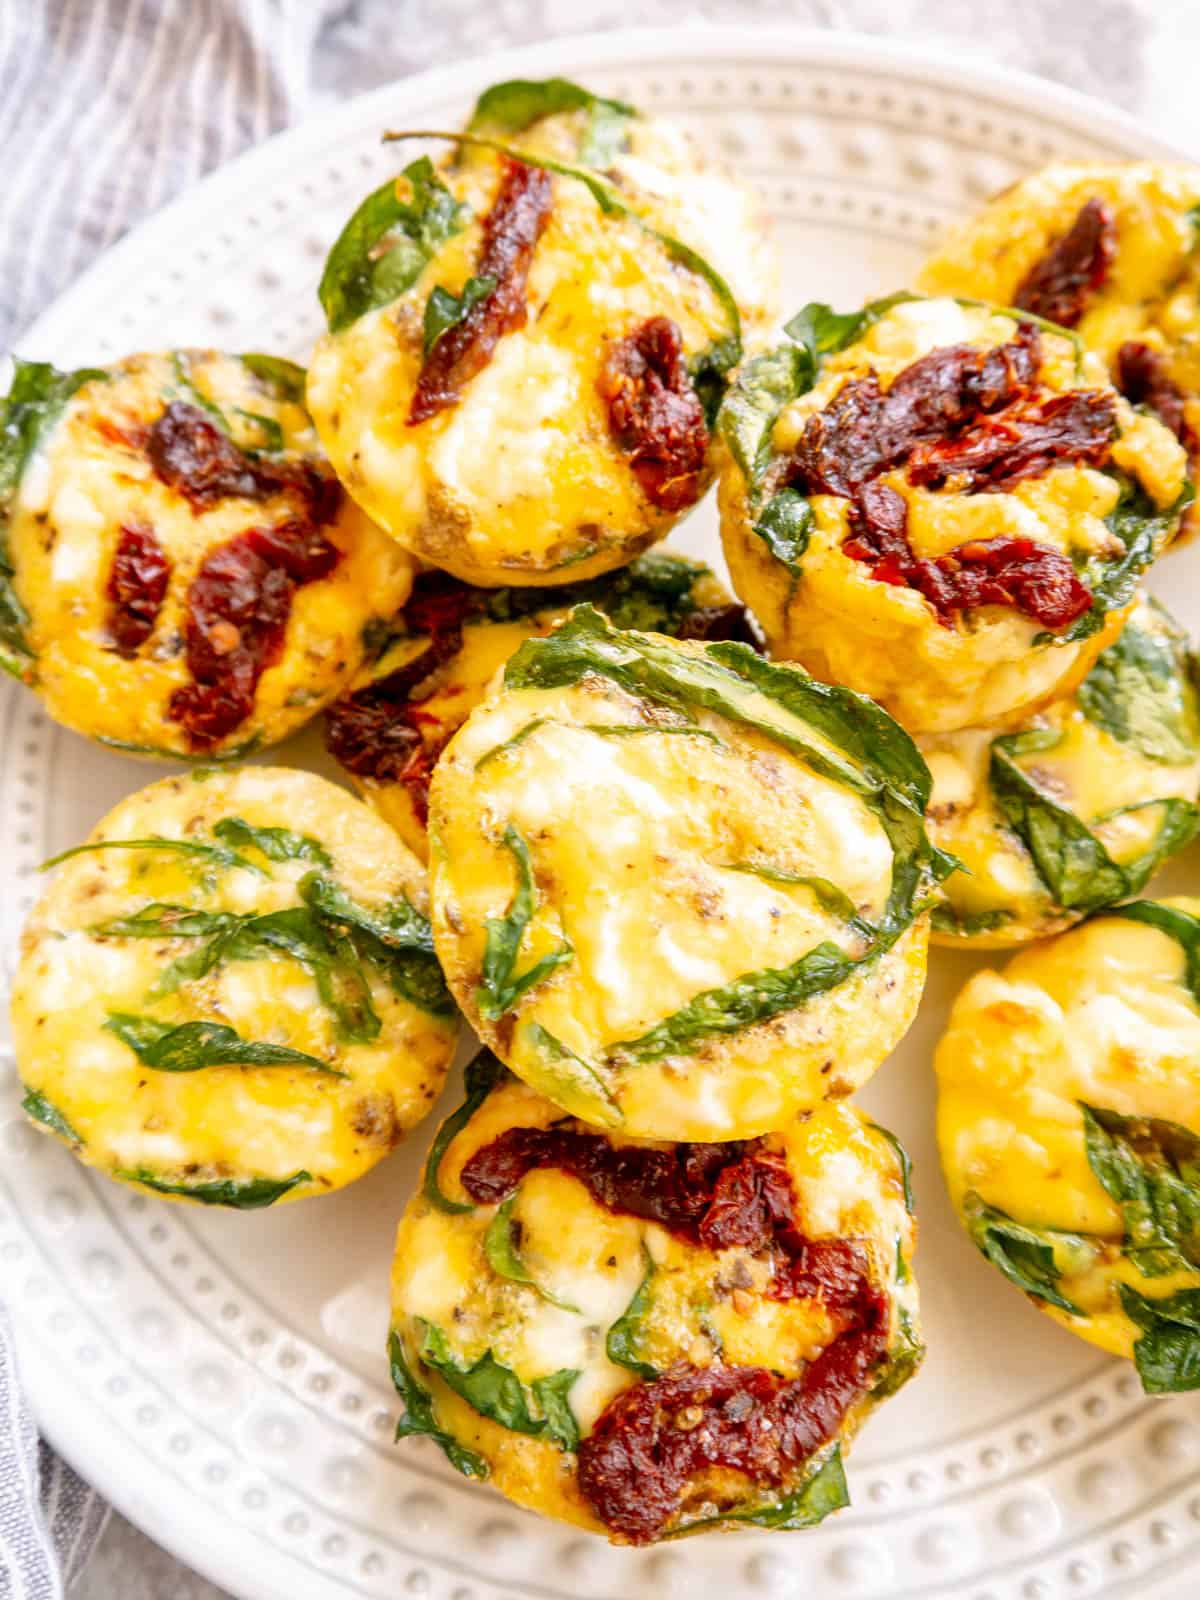 Spinach egg bites on a plate.